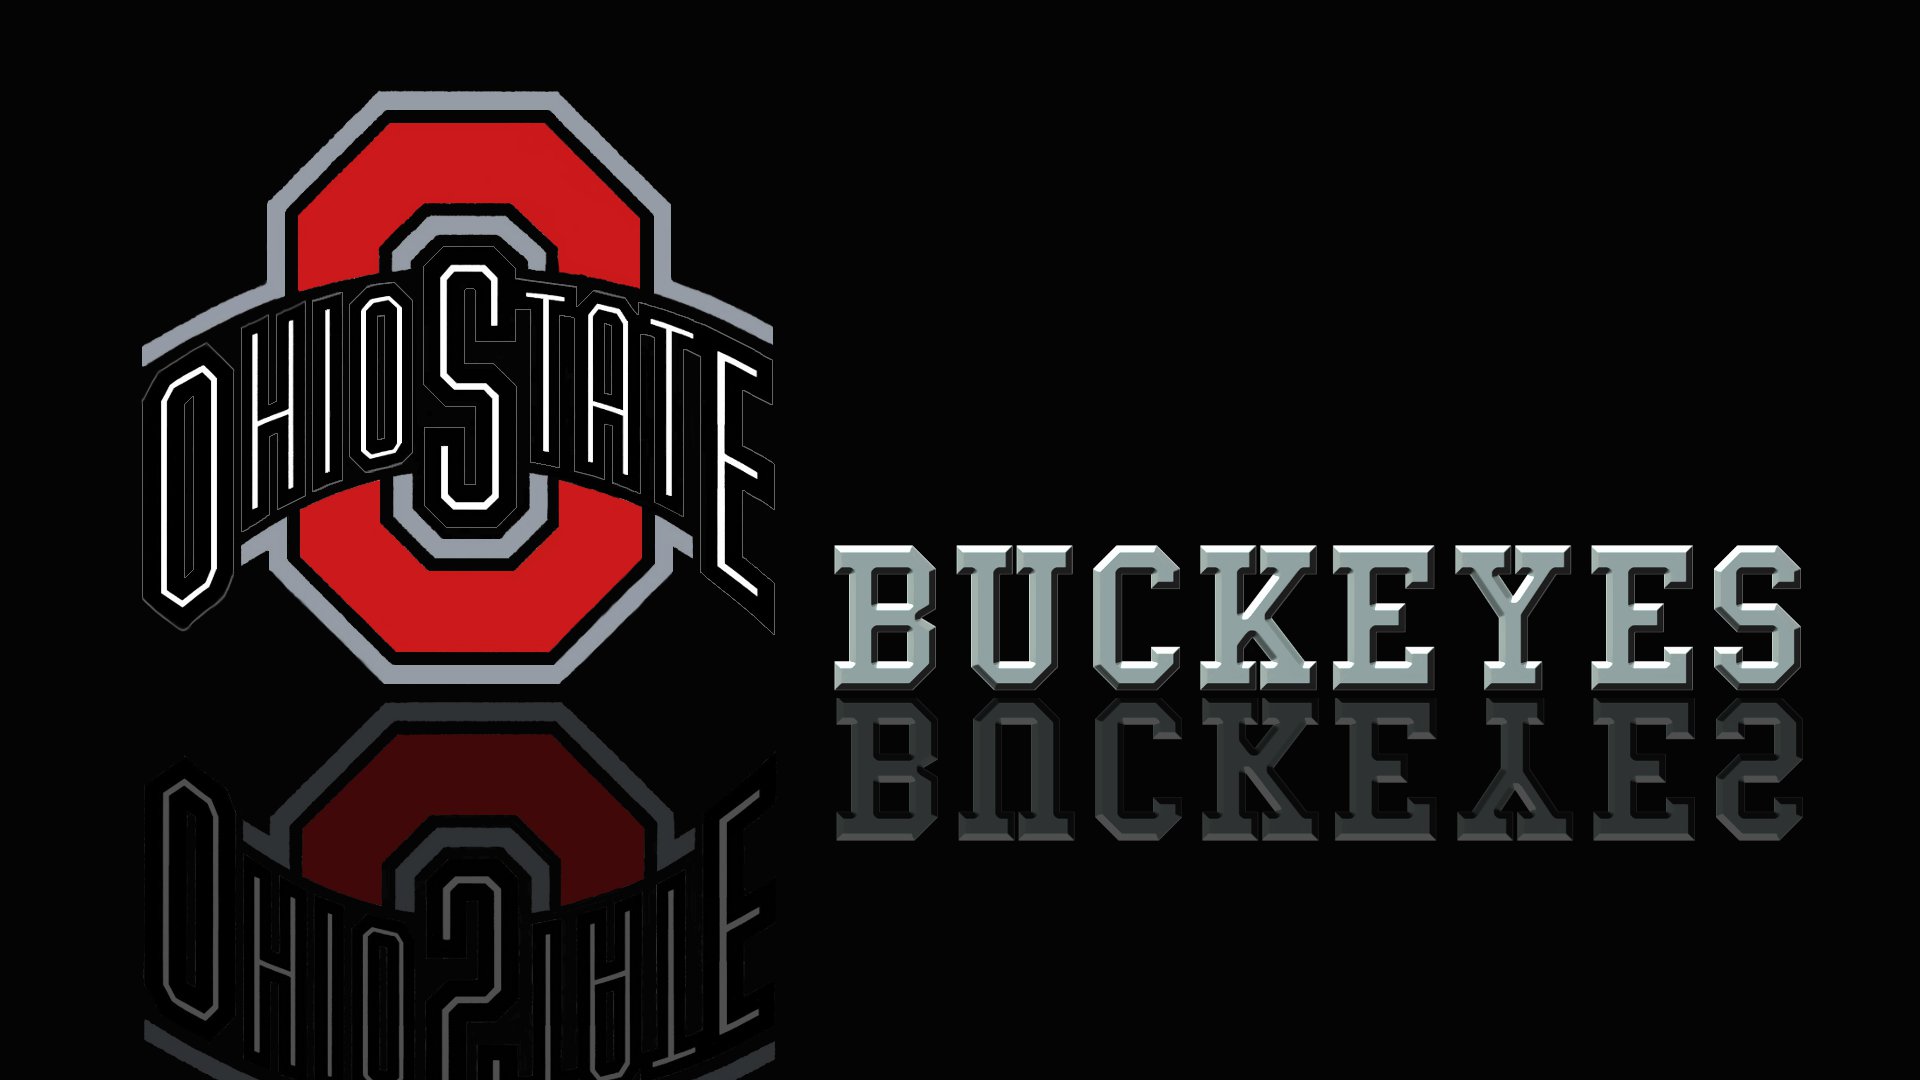 Ohio State Buckeyes Pictures Best HD Wallpaper Full